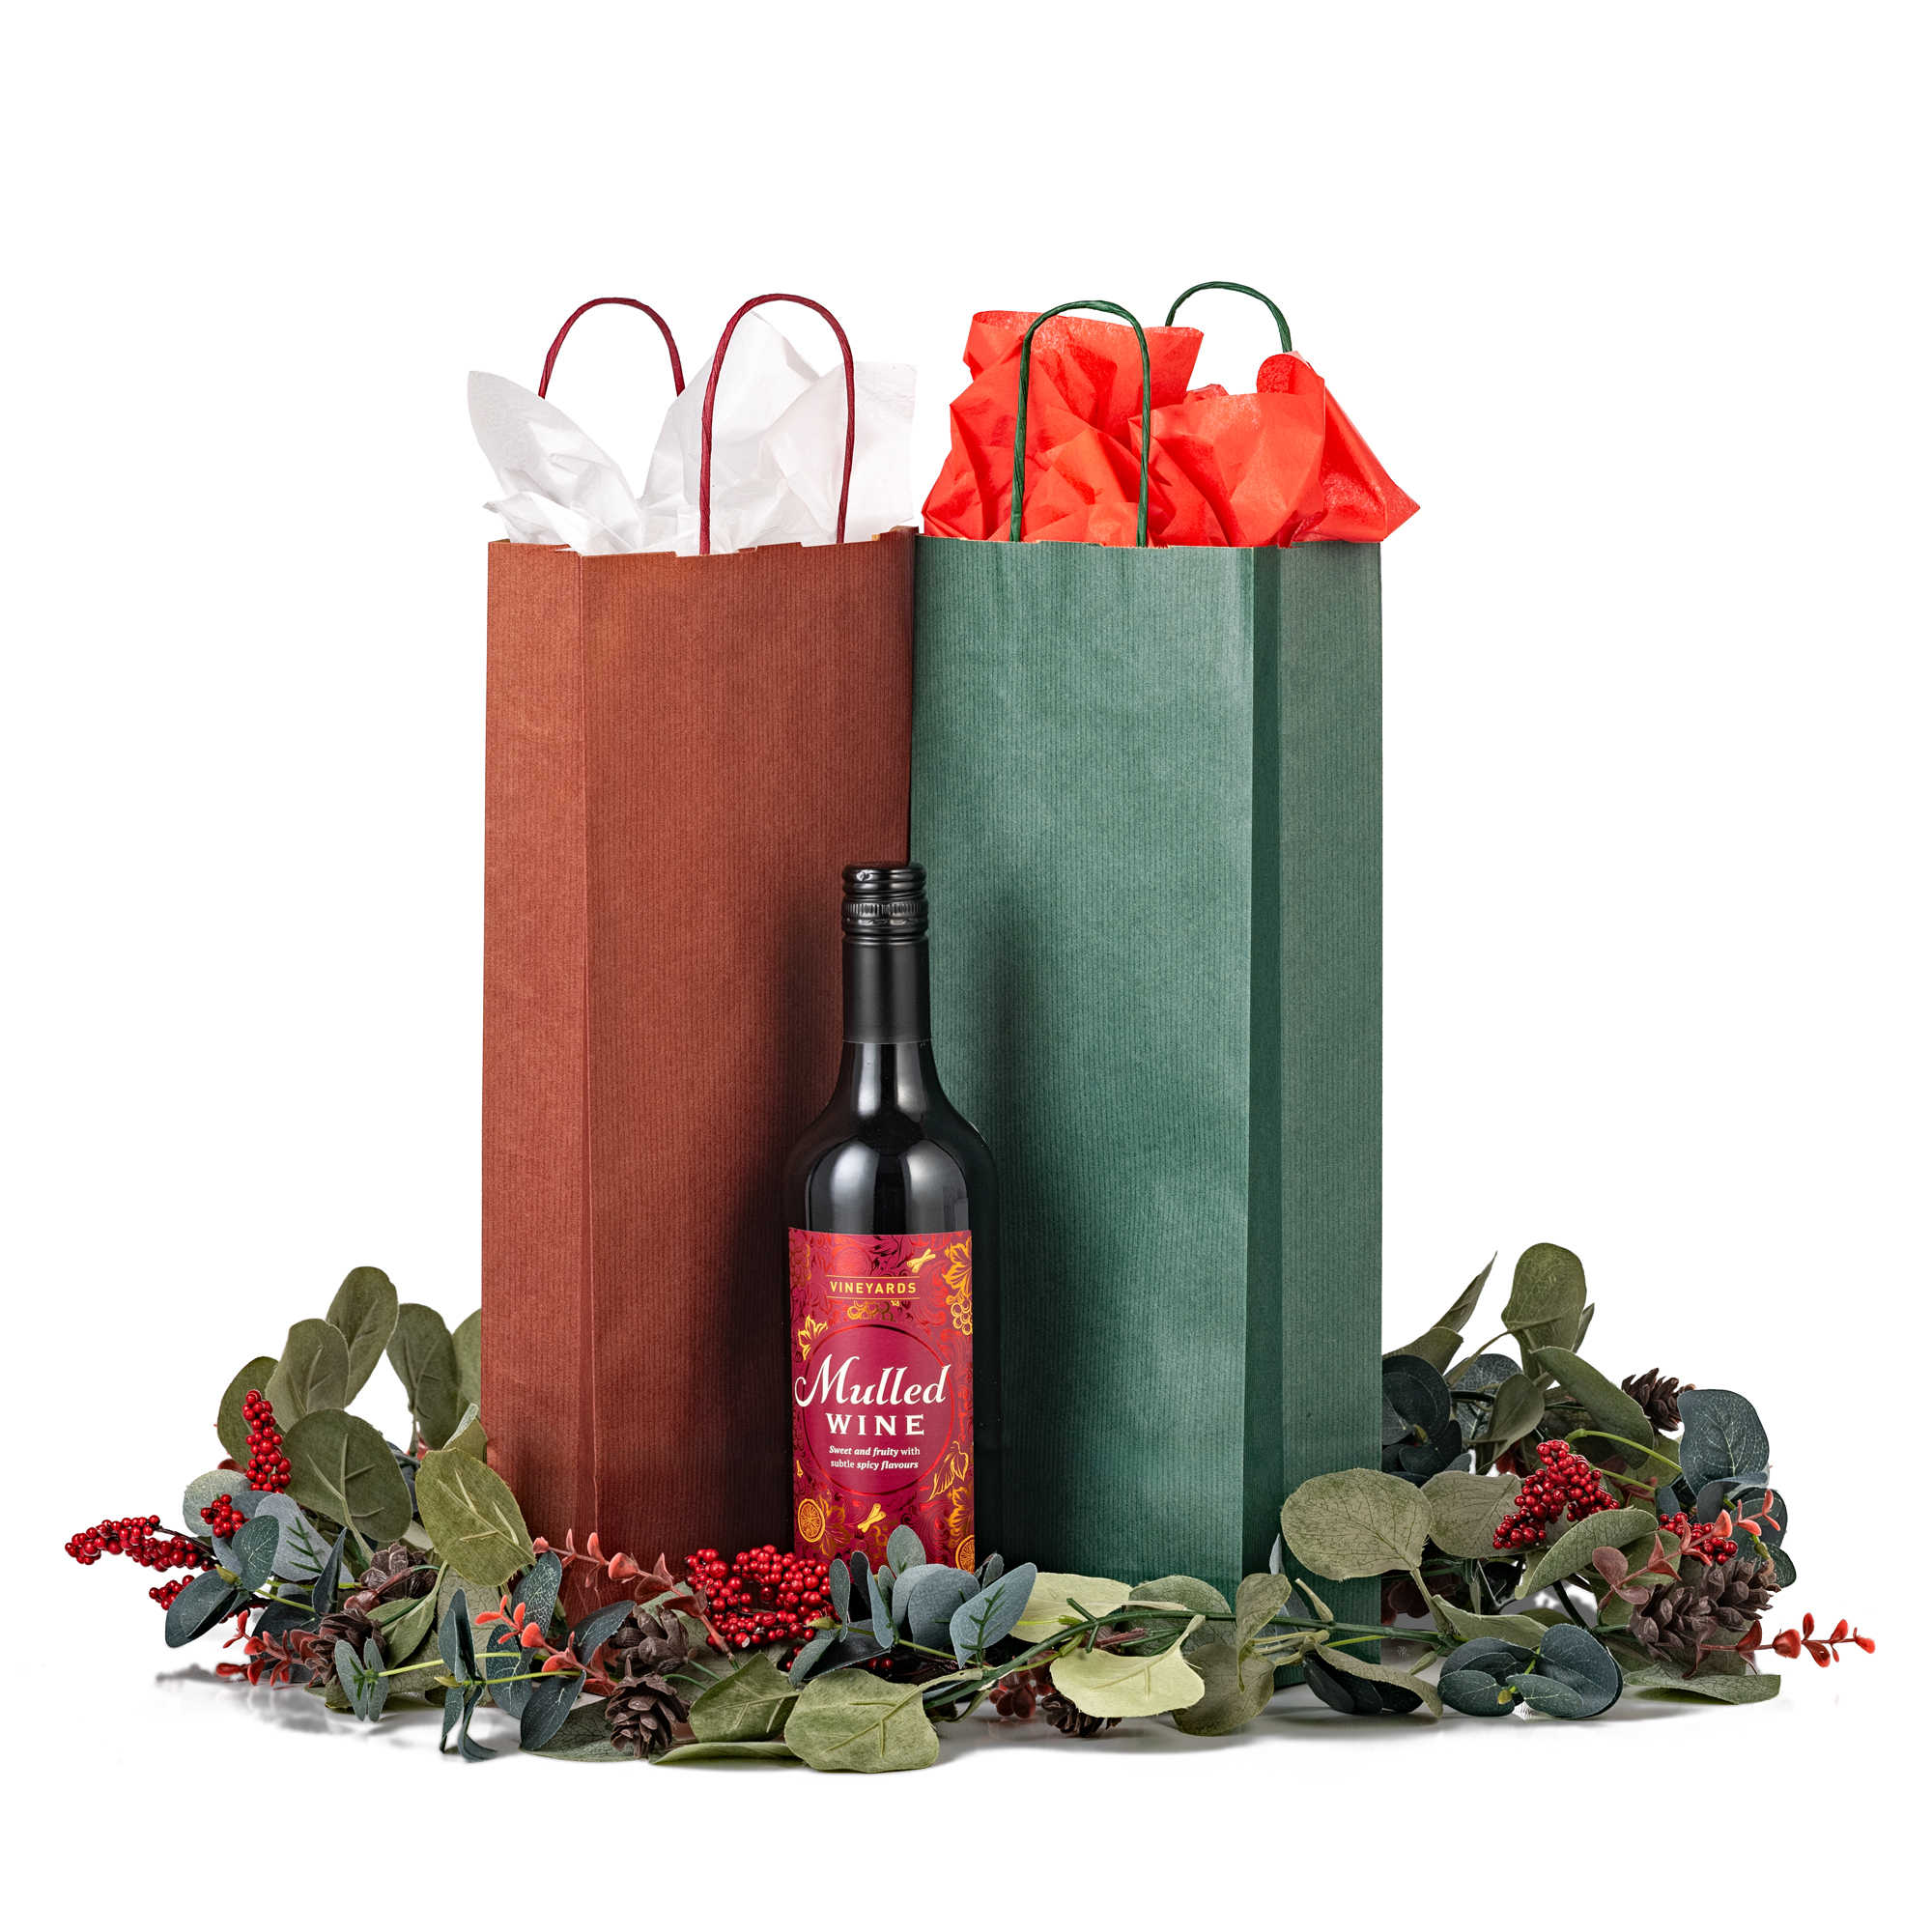 Perfecting your wine gift presentation with Tissue Paper.